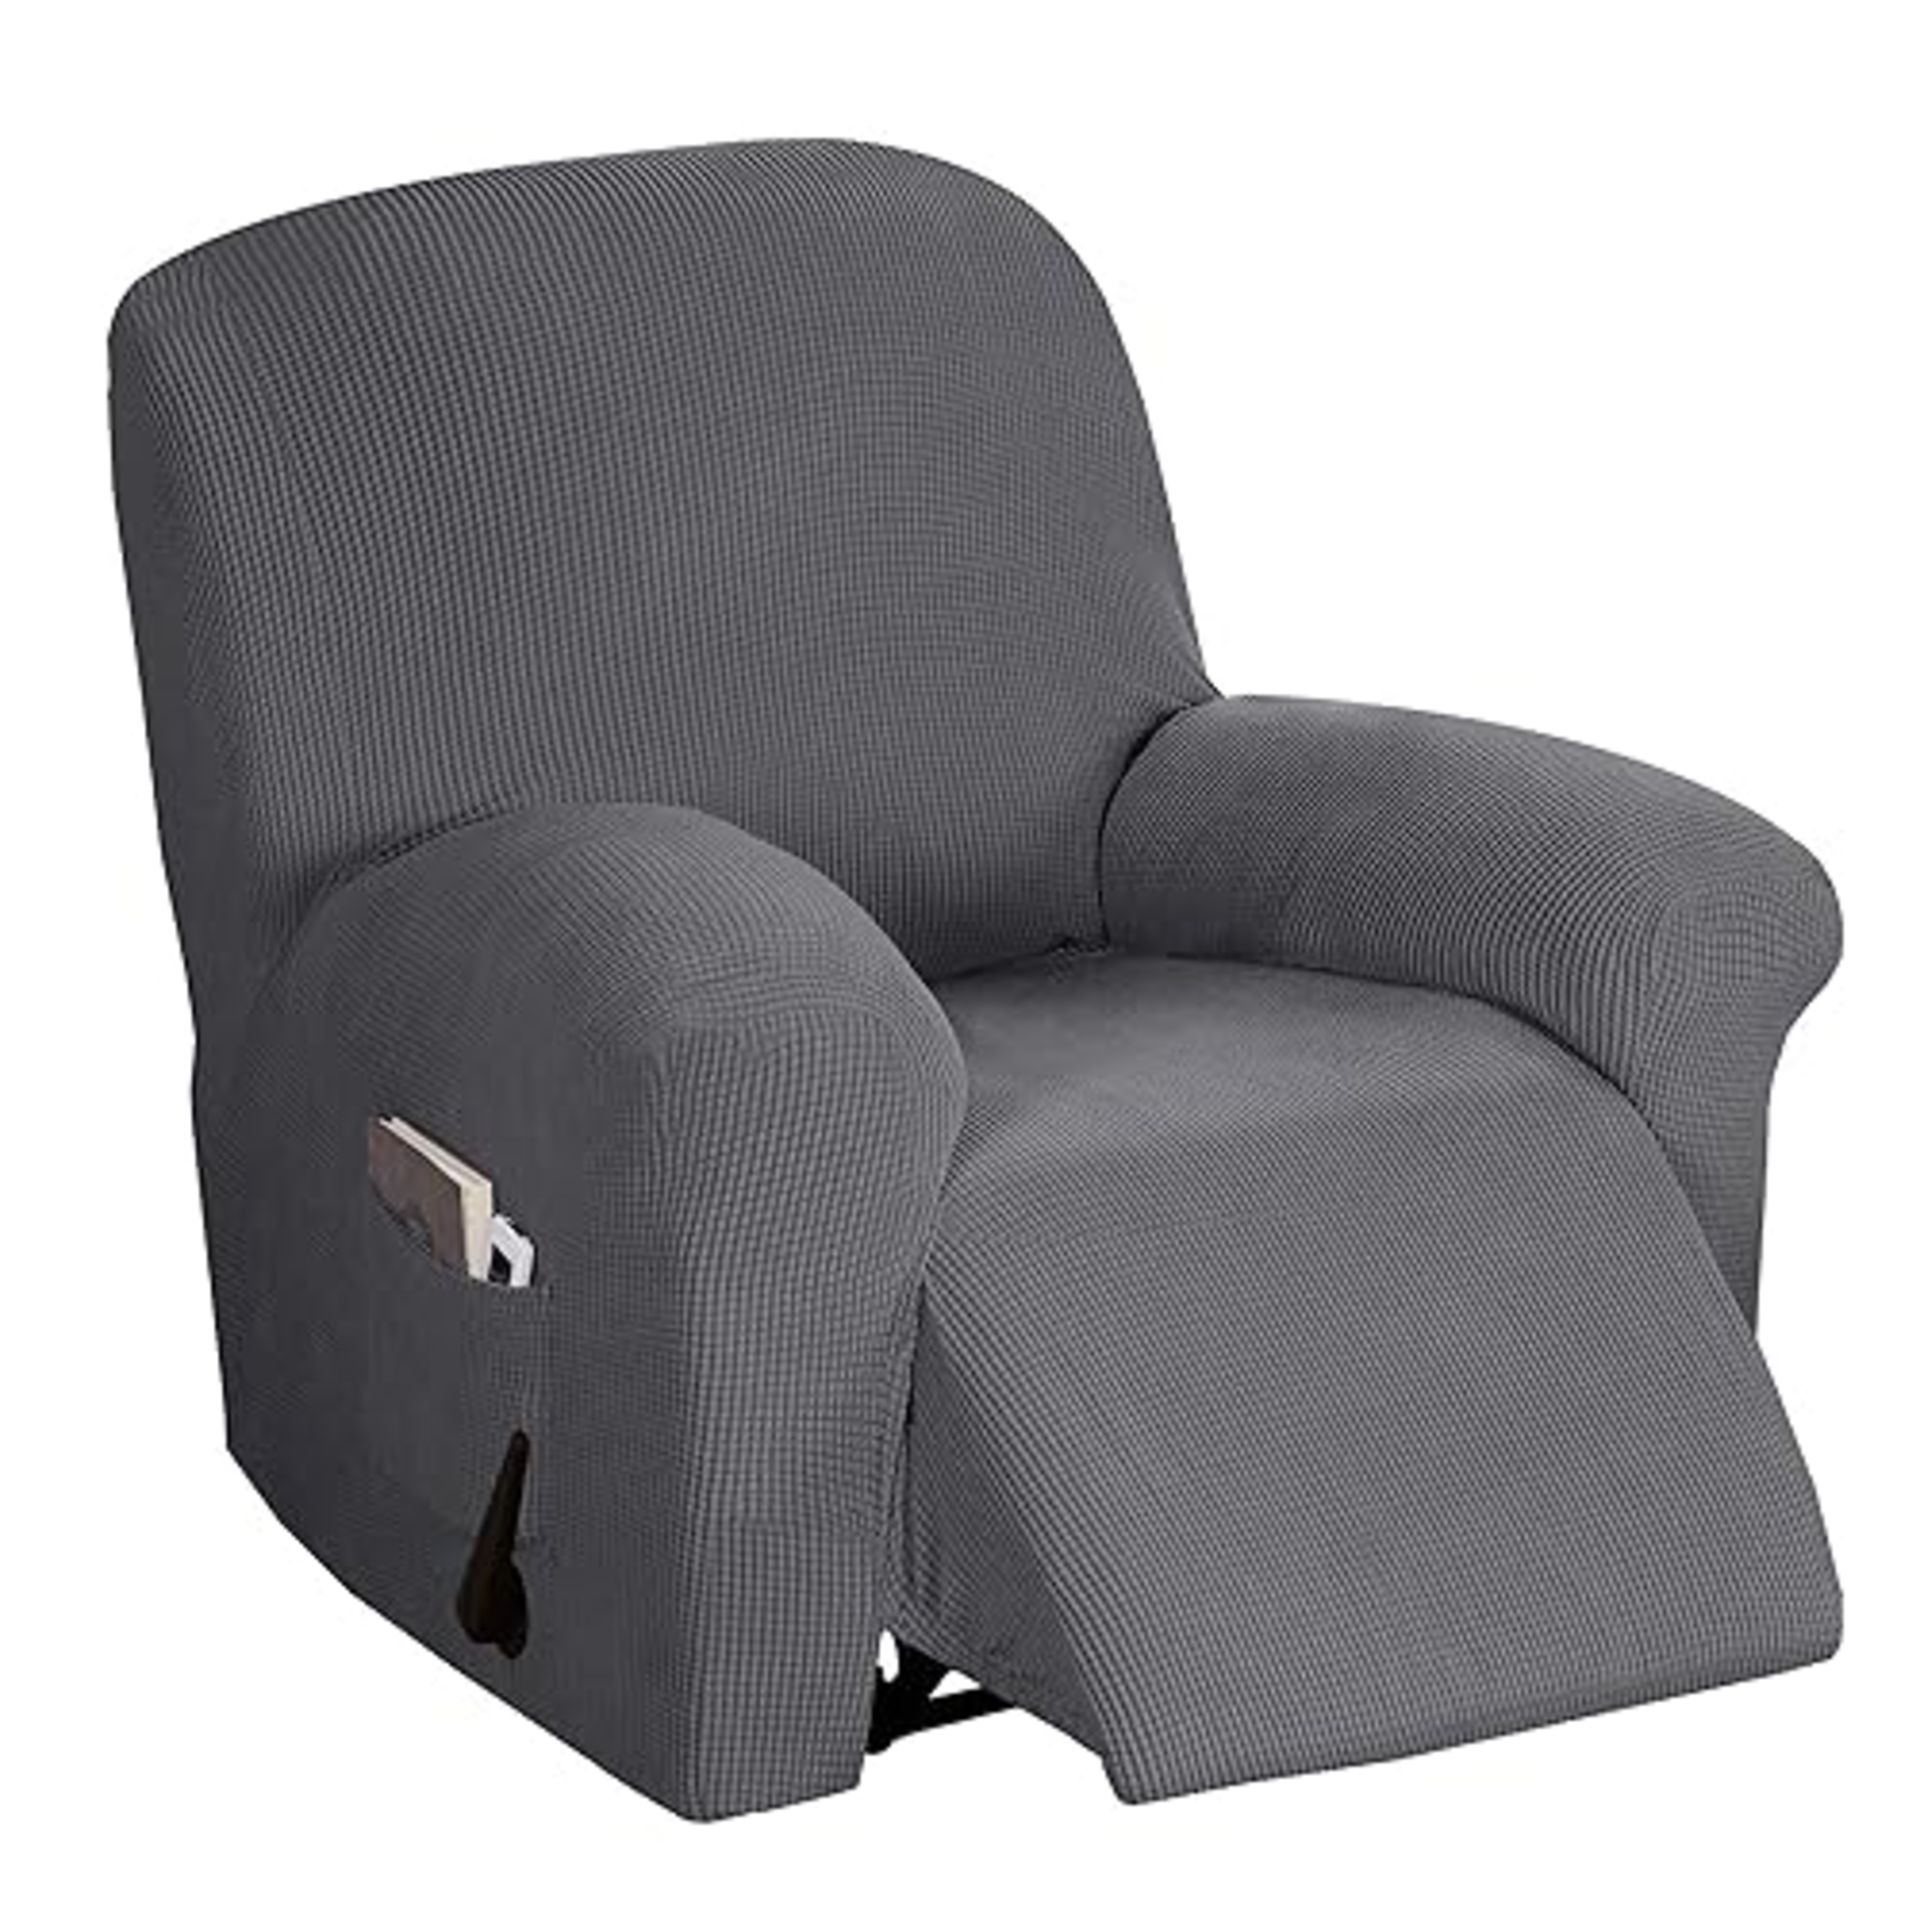 BellaHills Stretch Recliner Cover Recliner Chair Covers for Living Room Recliner Chair Slipcover wi